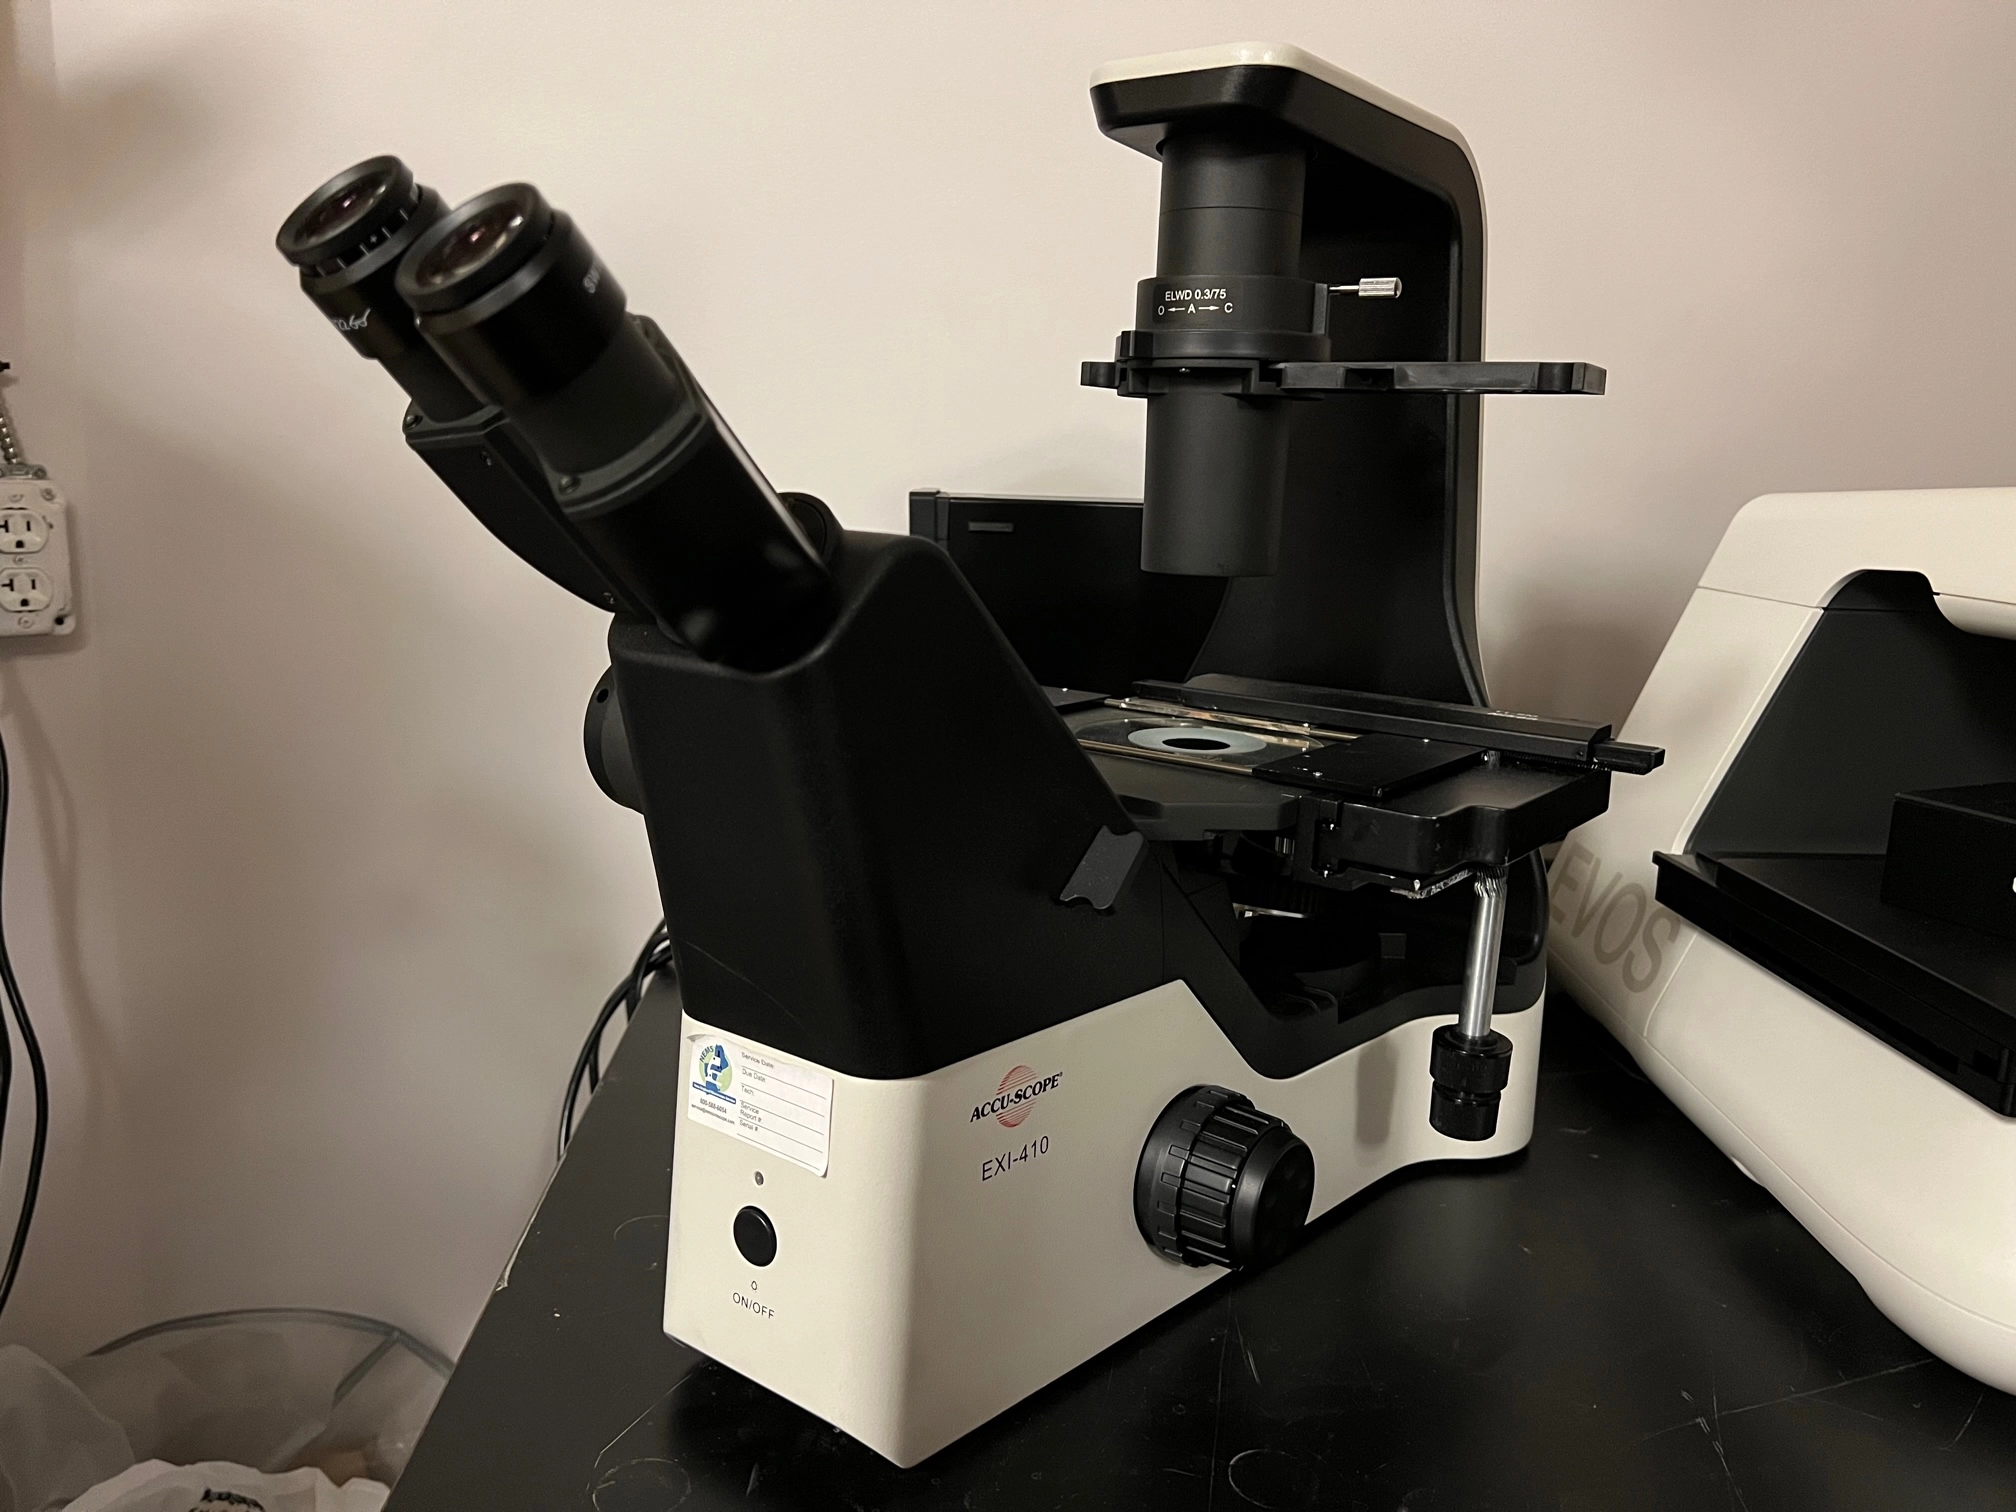 Accu-Scope EXI-410 Inverted Phase Contrast Microscope